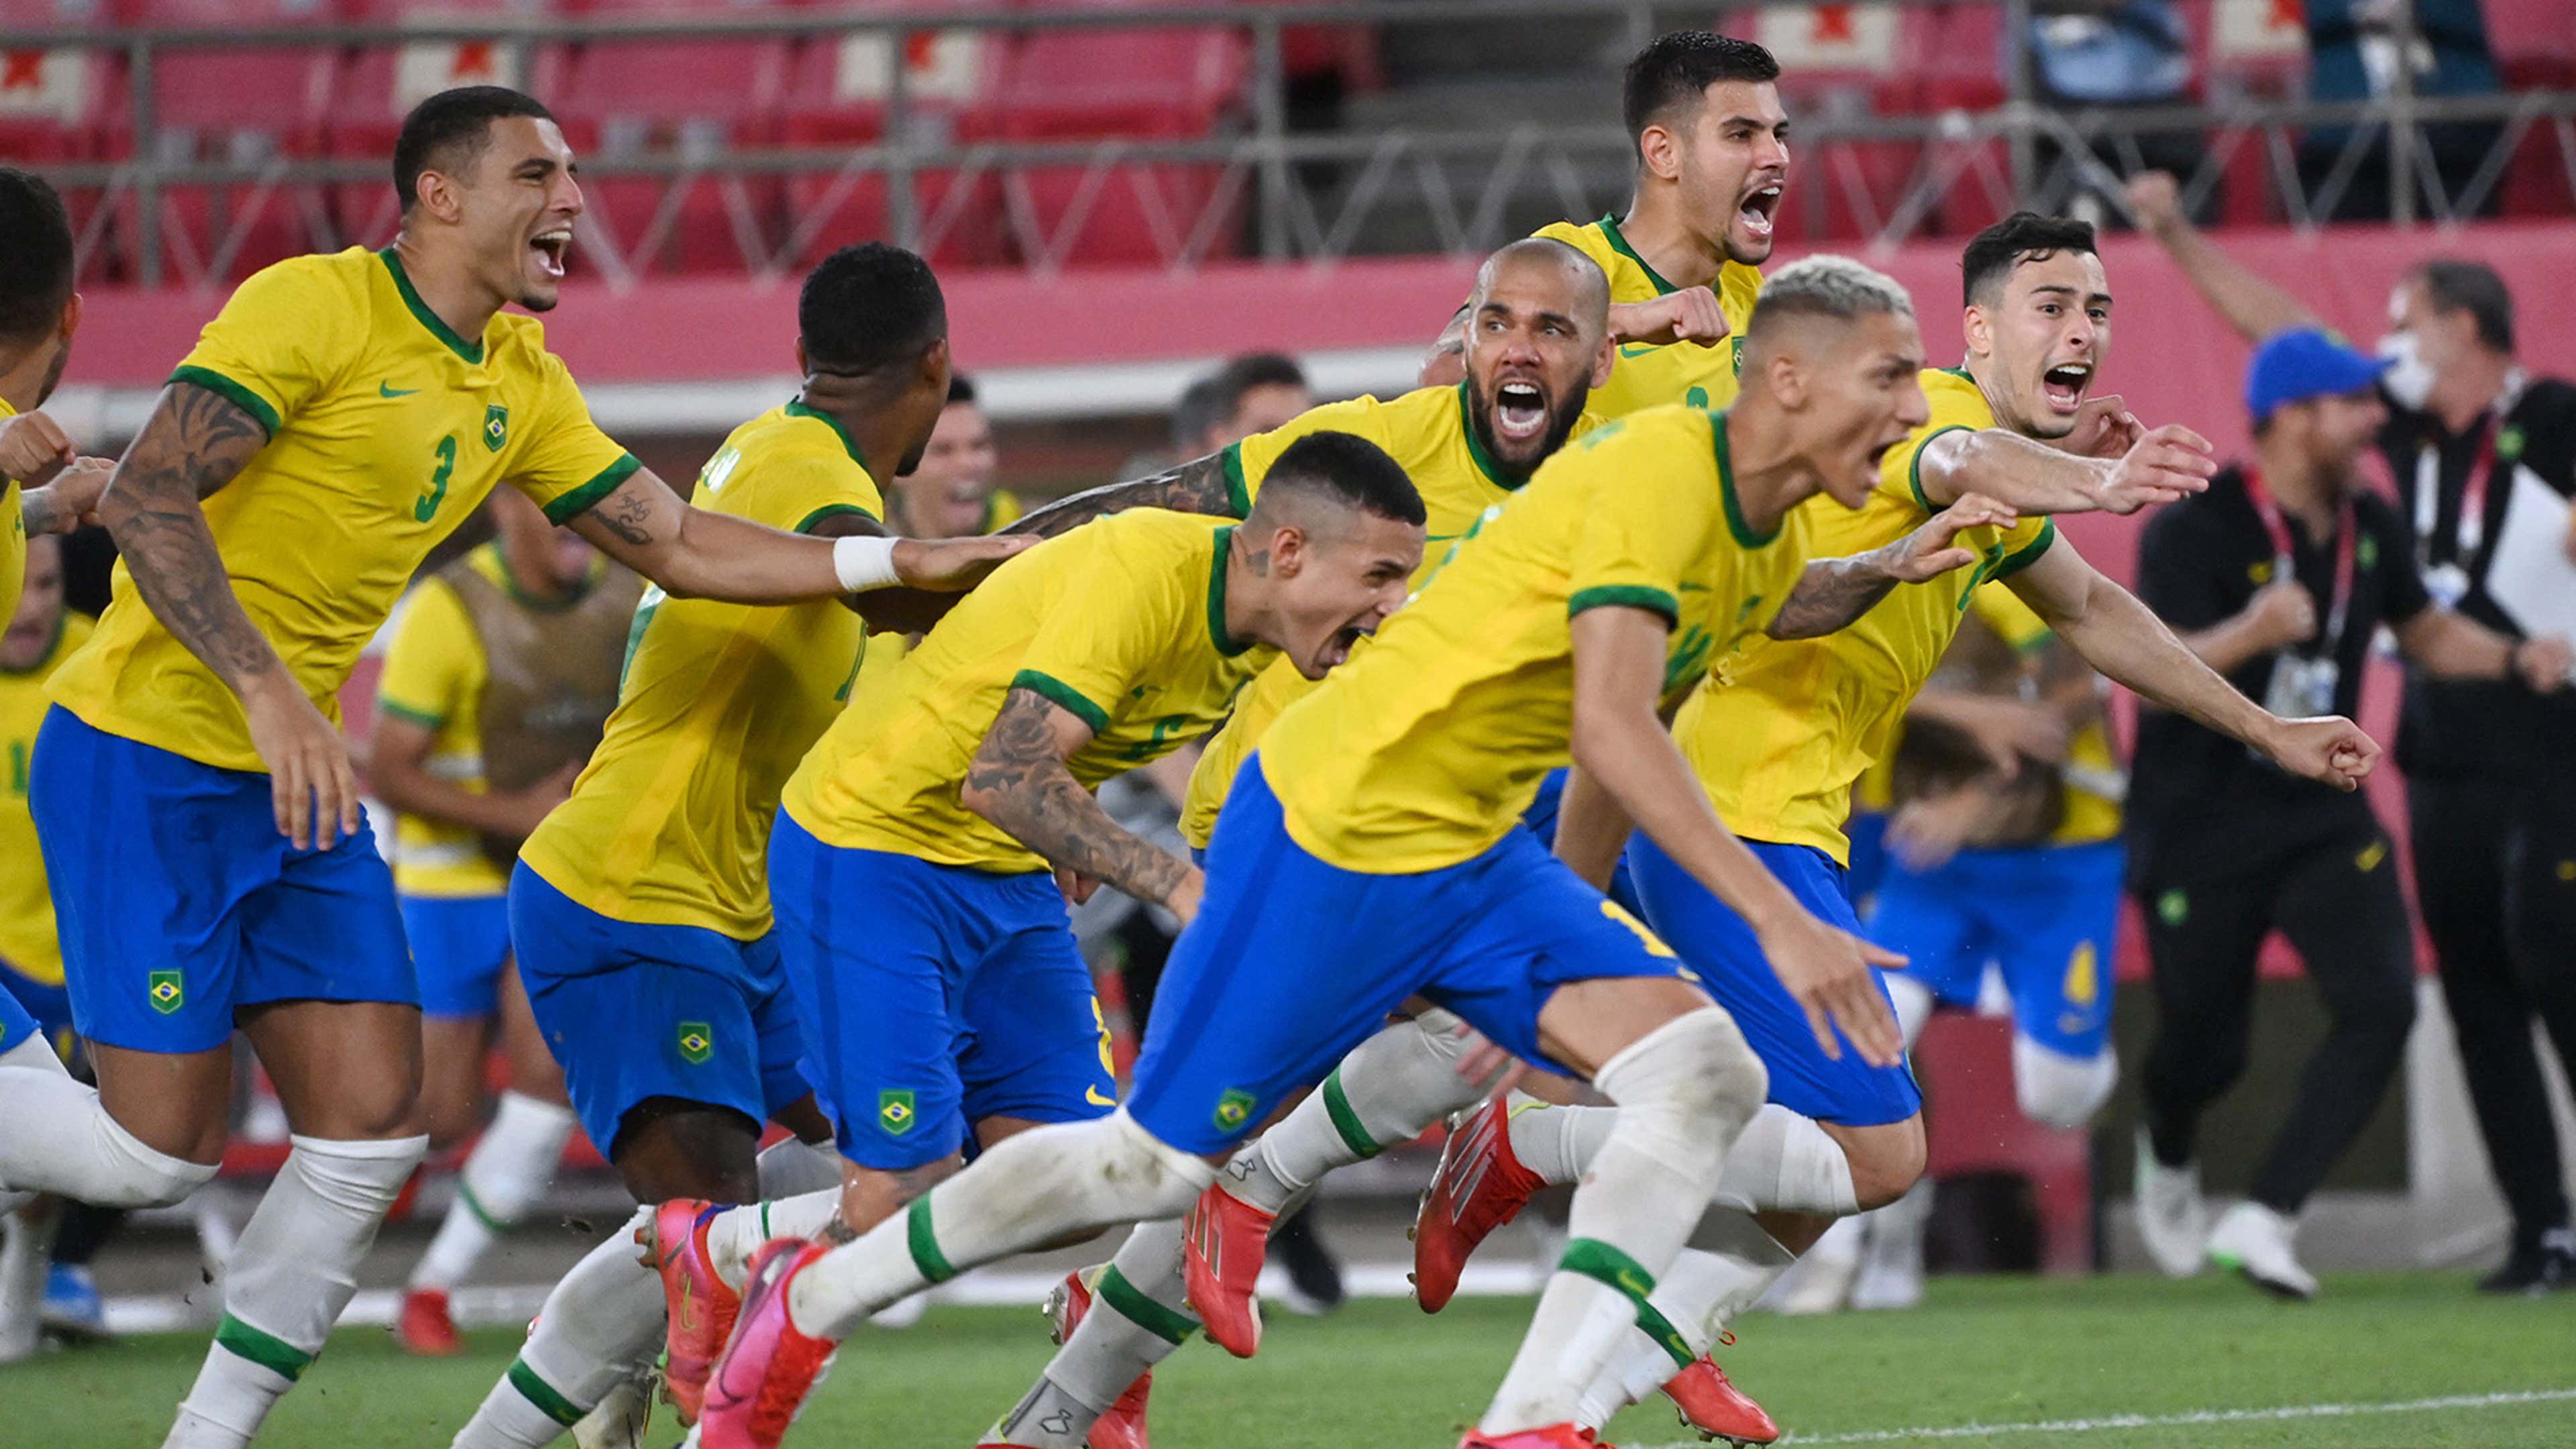 How to watch Brazil vs Spain in Olympics 2020 Final from India? Goal